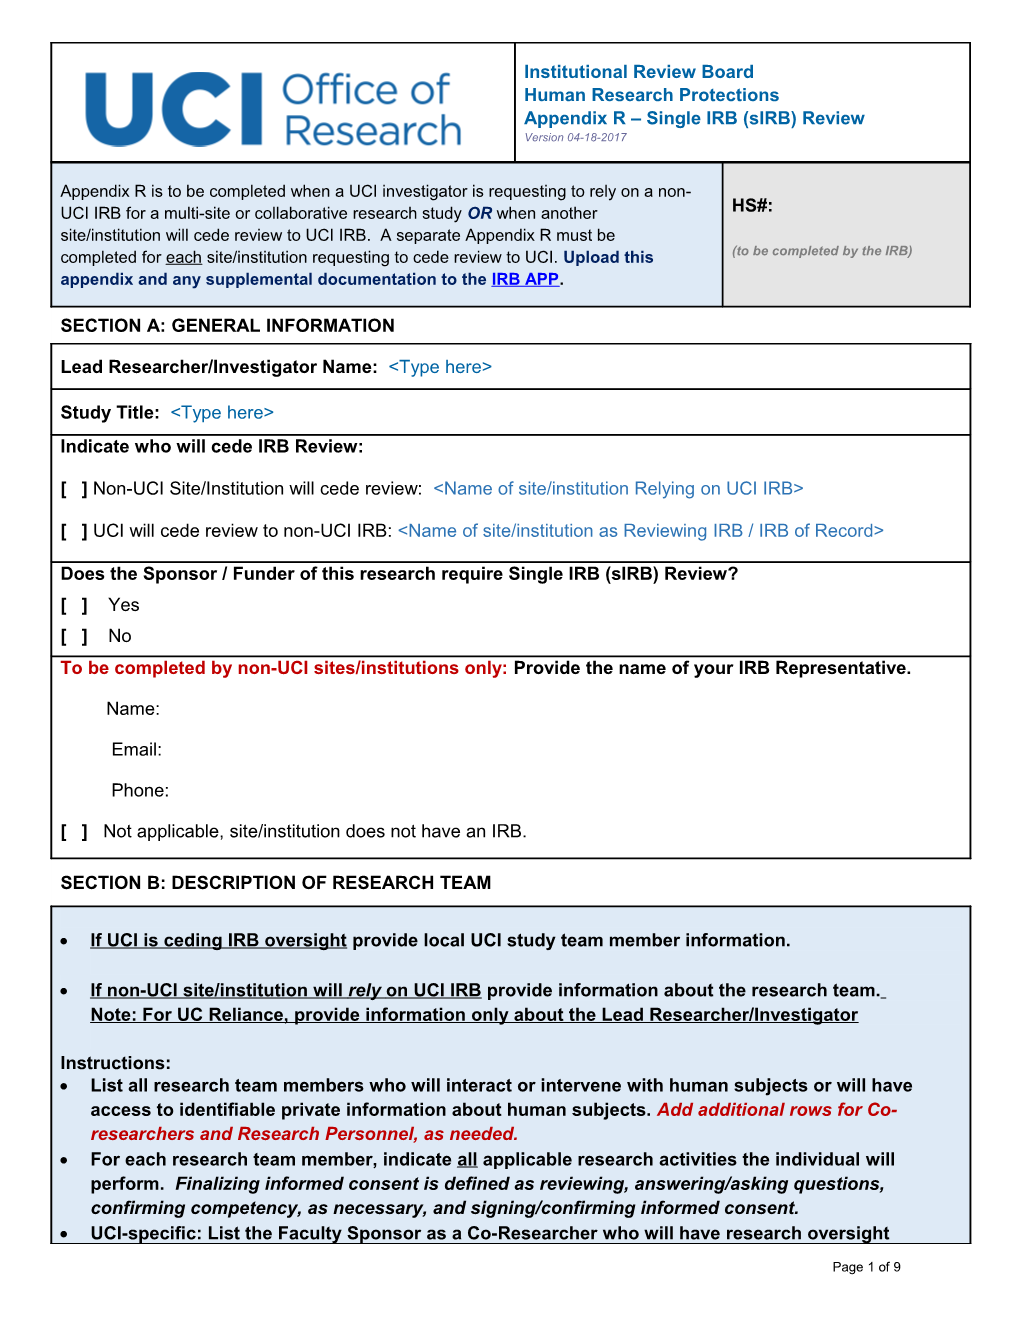 CIRB Annual Principal Investigator Worksheet About Local Context